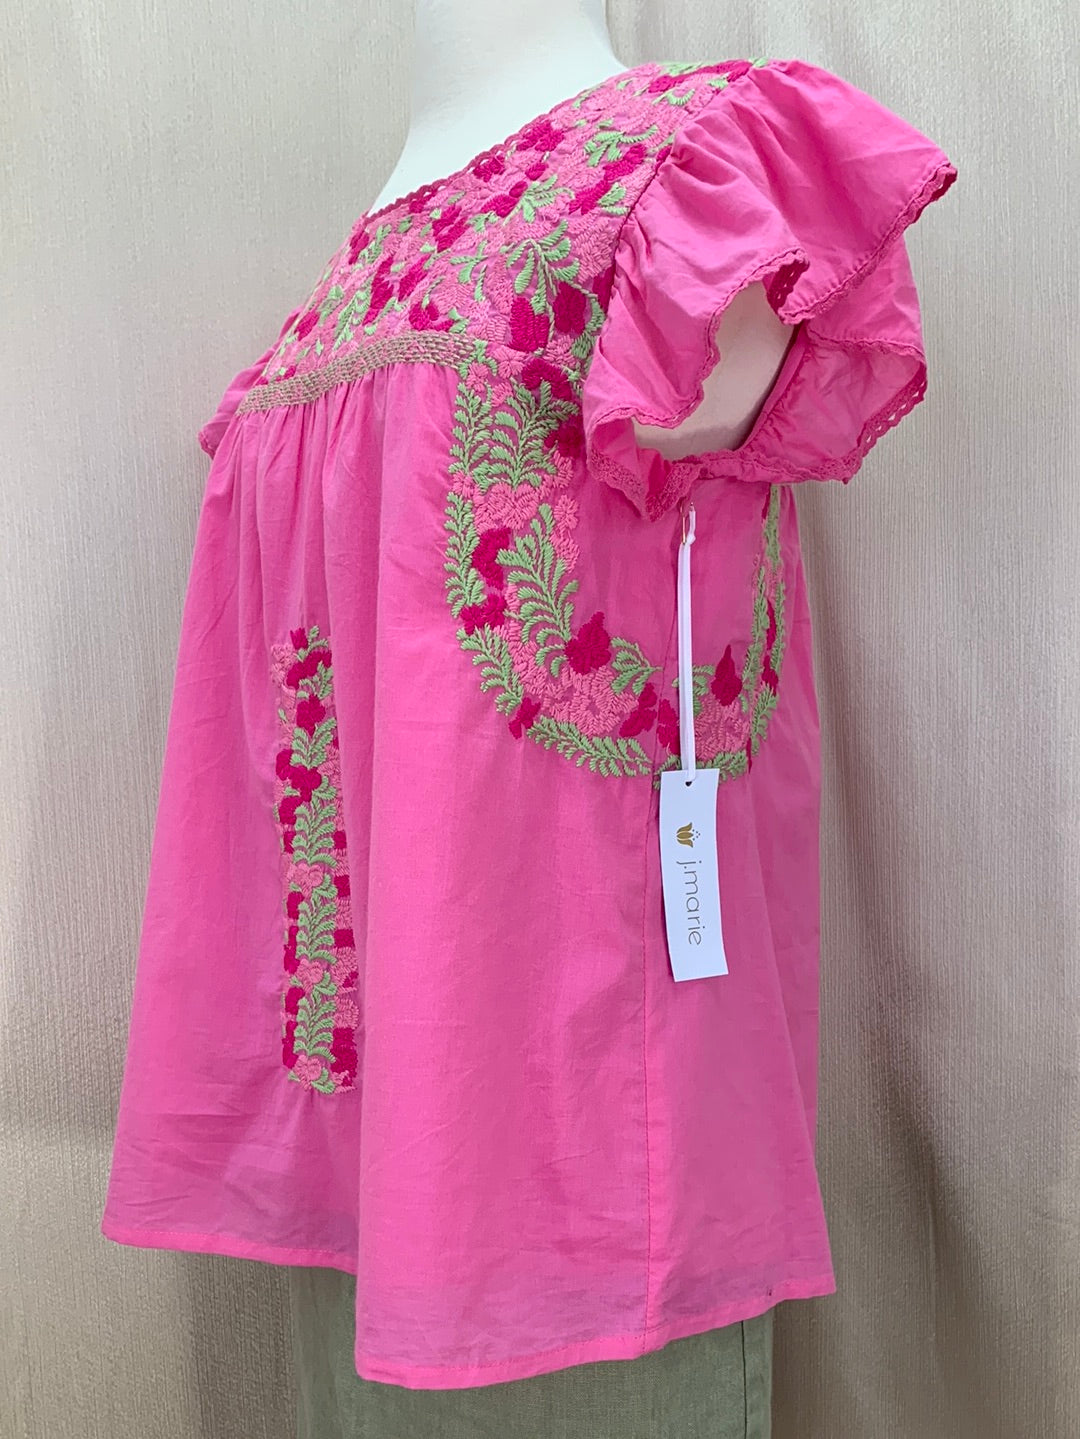 NWT - J MARIE pink green Embroidered Flutter Sleeve Lined Kehlani Top - M